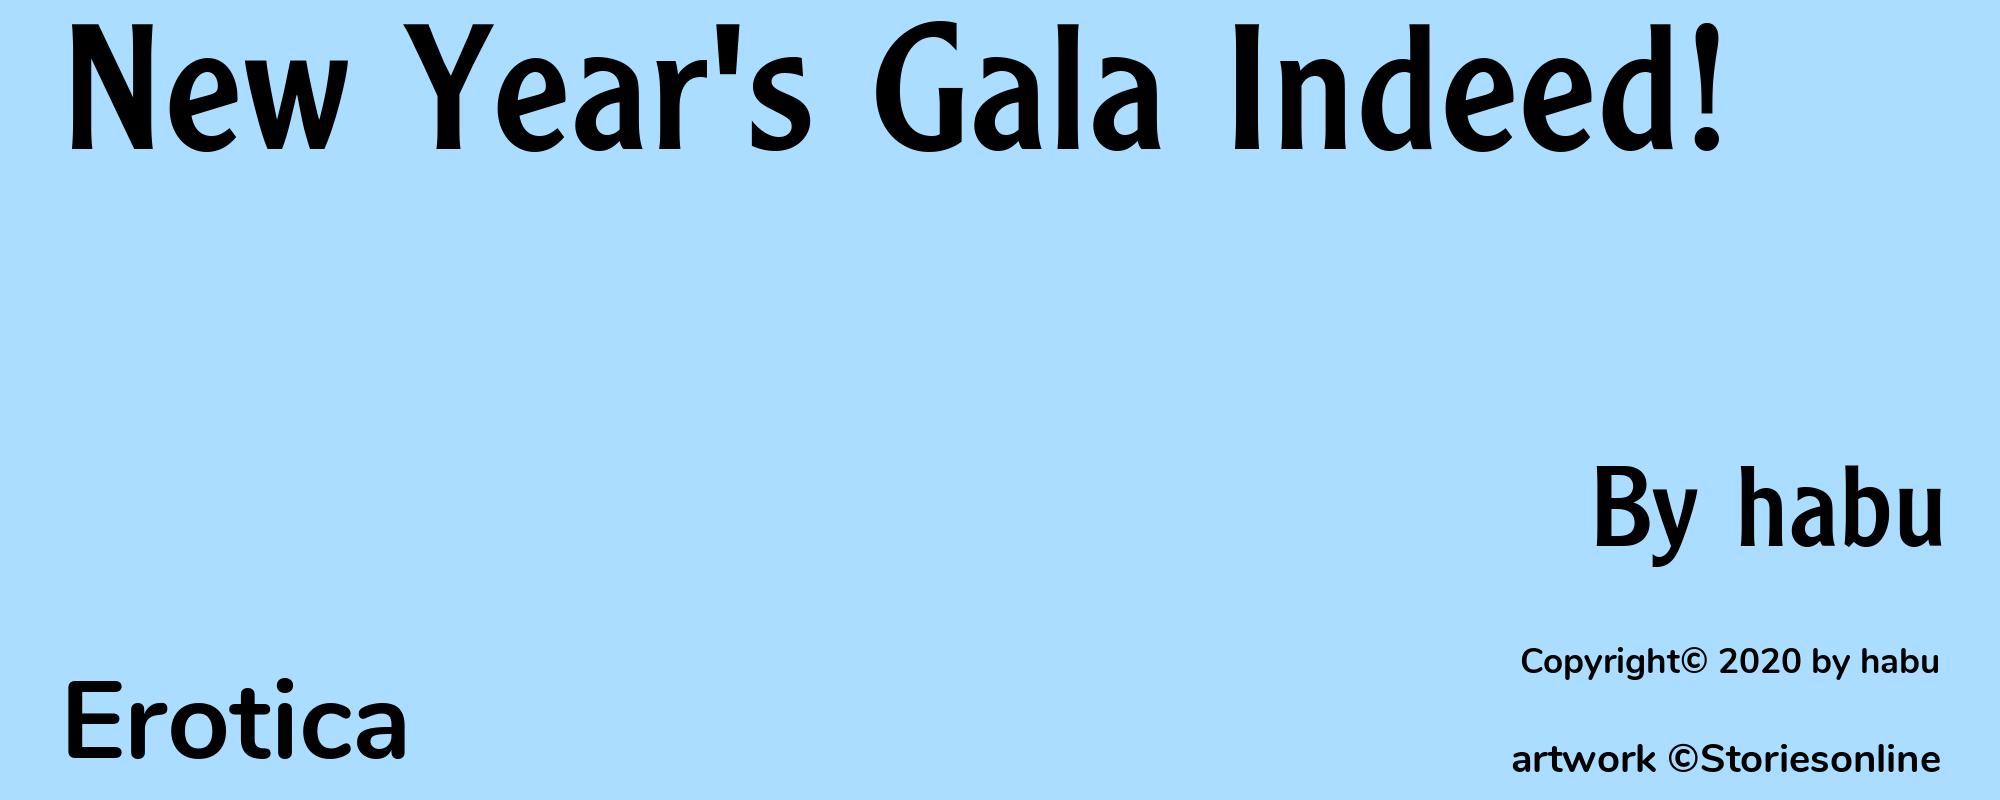 New Year's Gala Indeed! - Cover